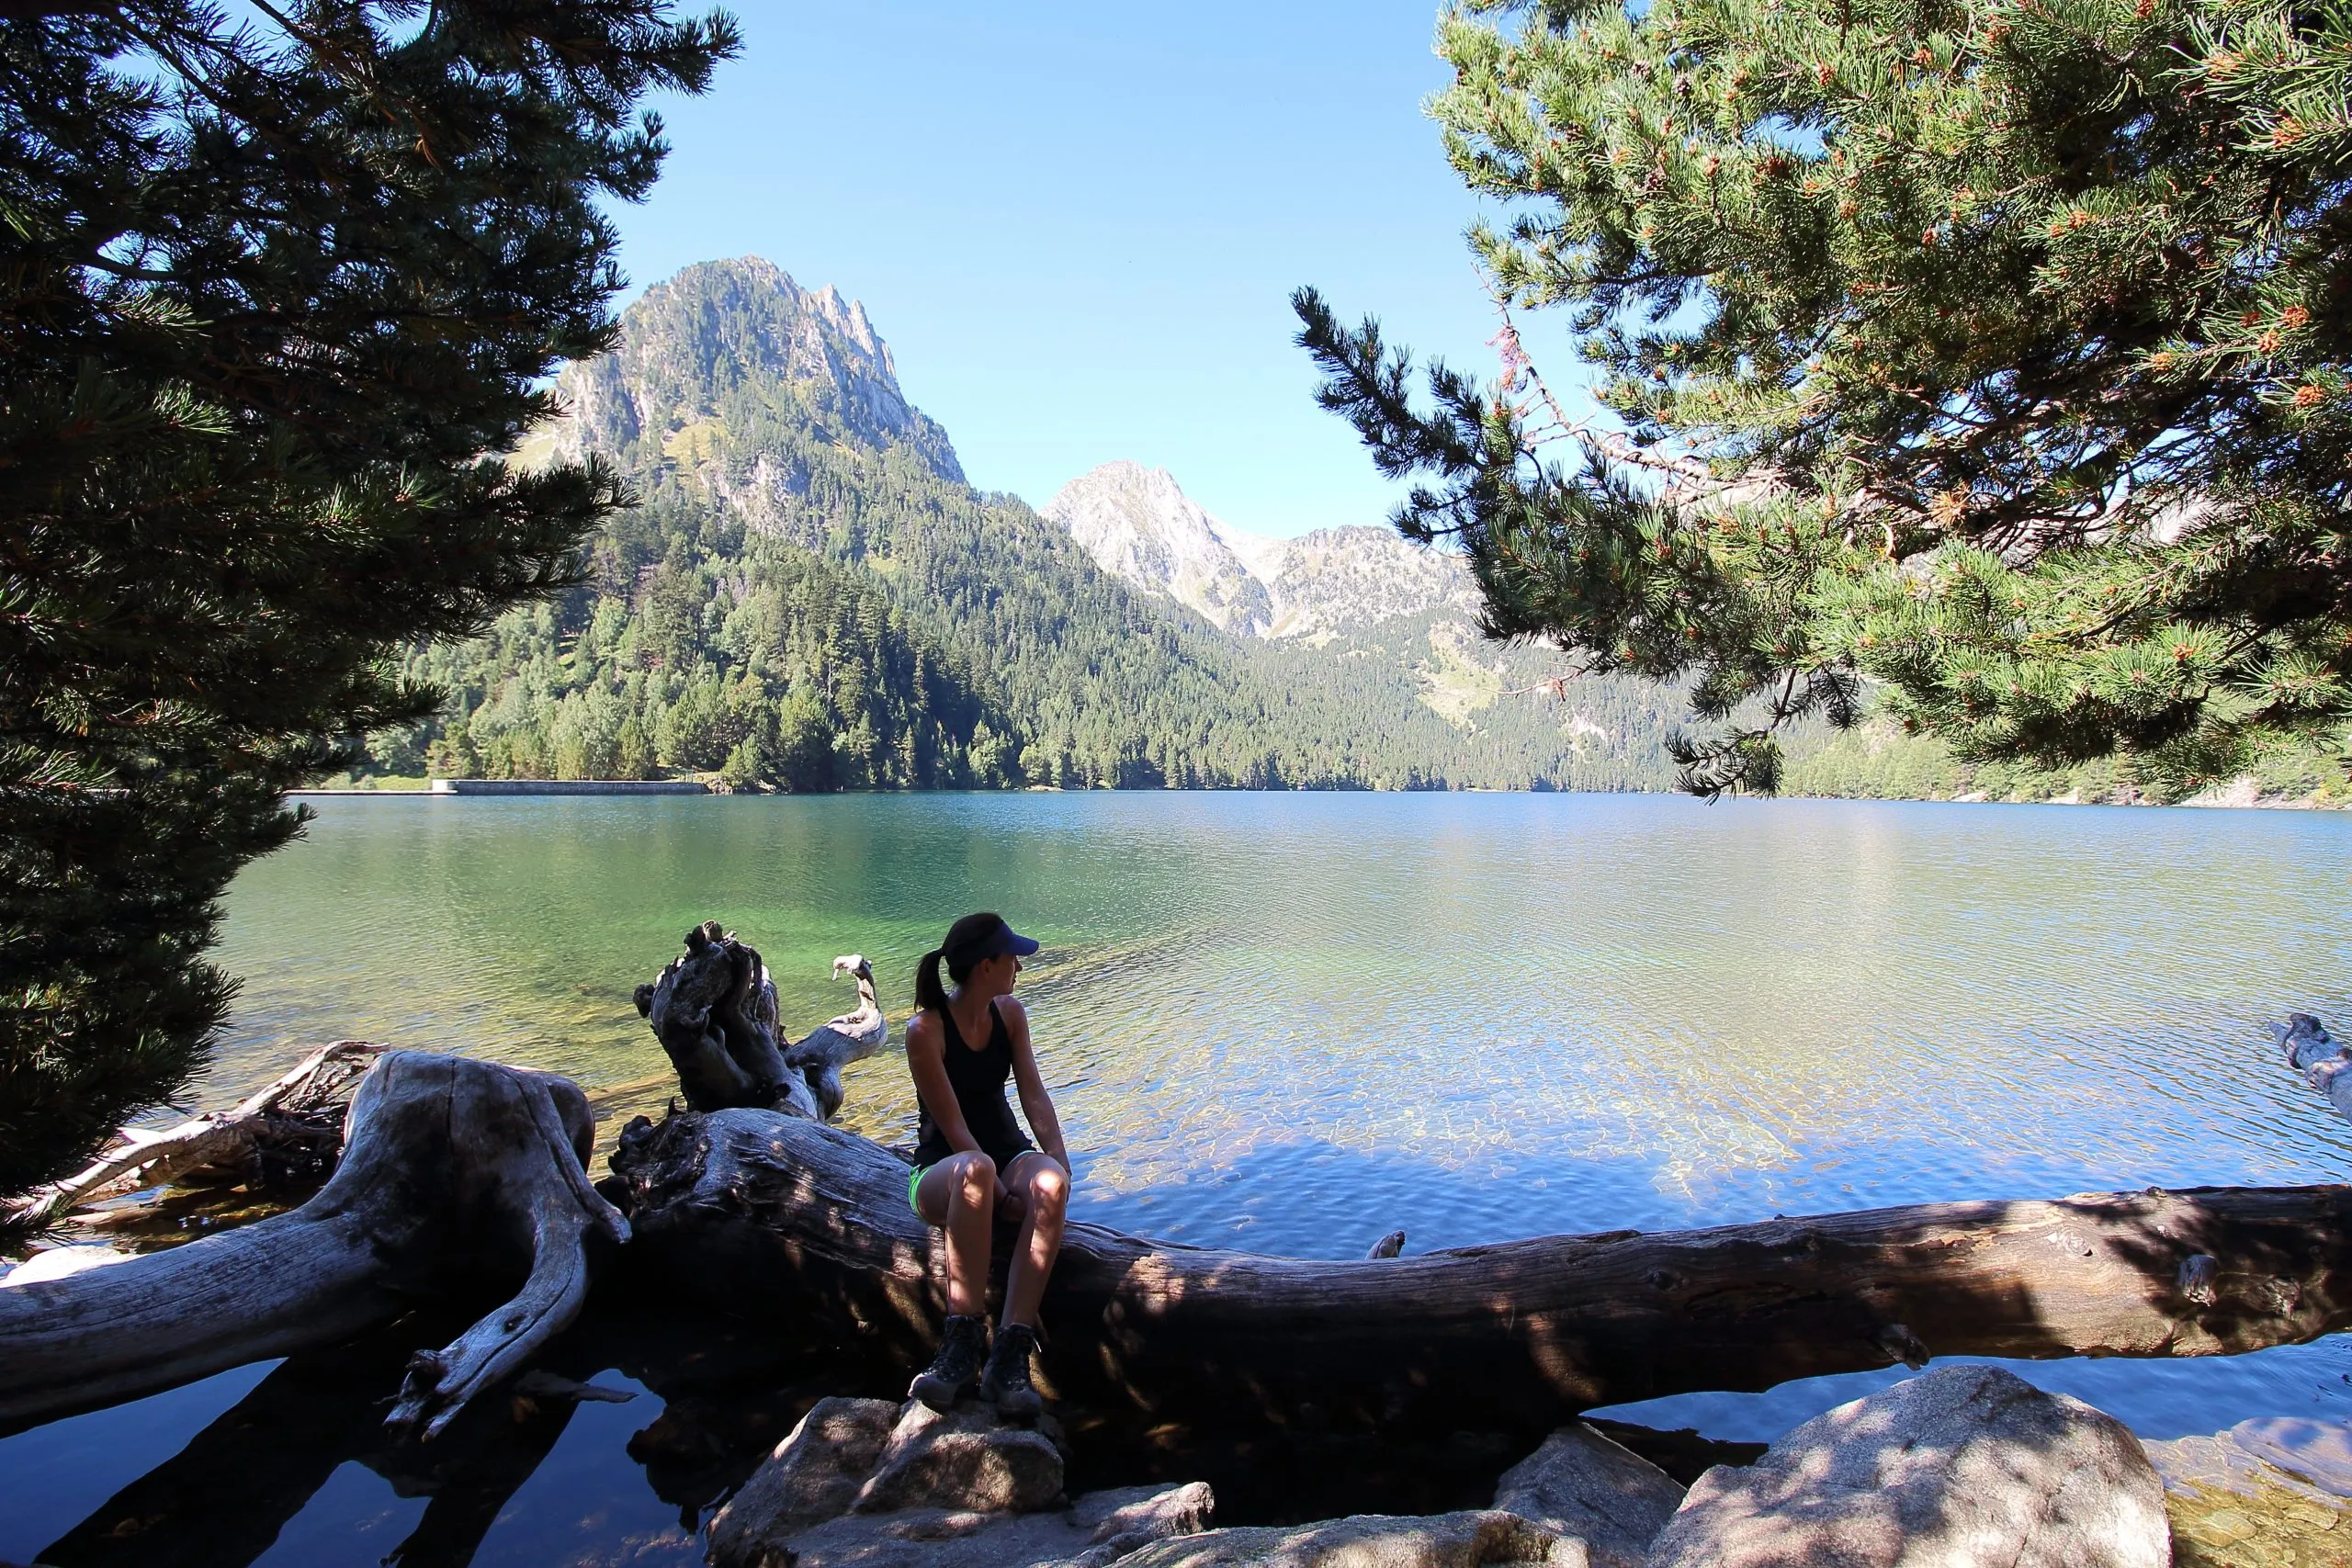 Young beautiful woman restin in Estany de Sant Maurici lake, after a long mrning hike in the Aiguestortes National Park, Pyreness mountains, Catalonia, Spain